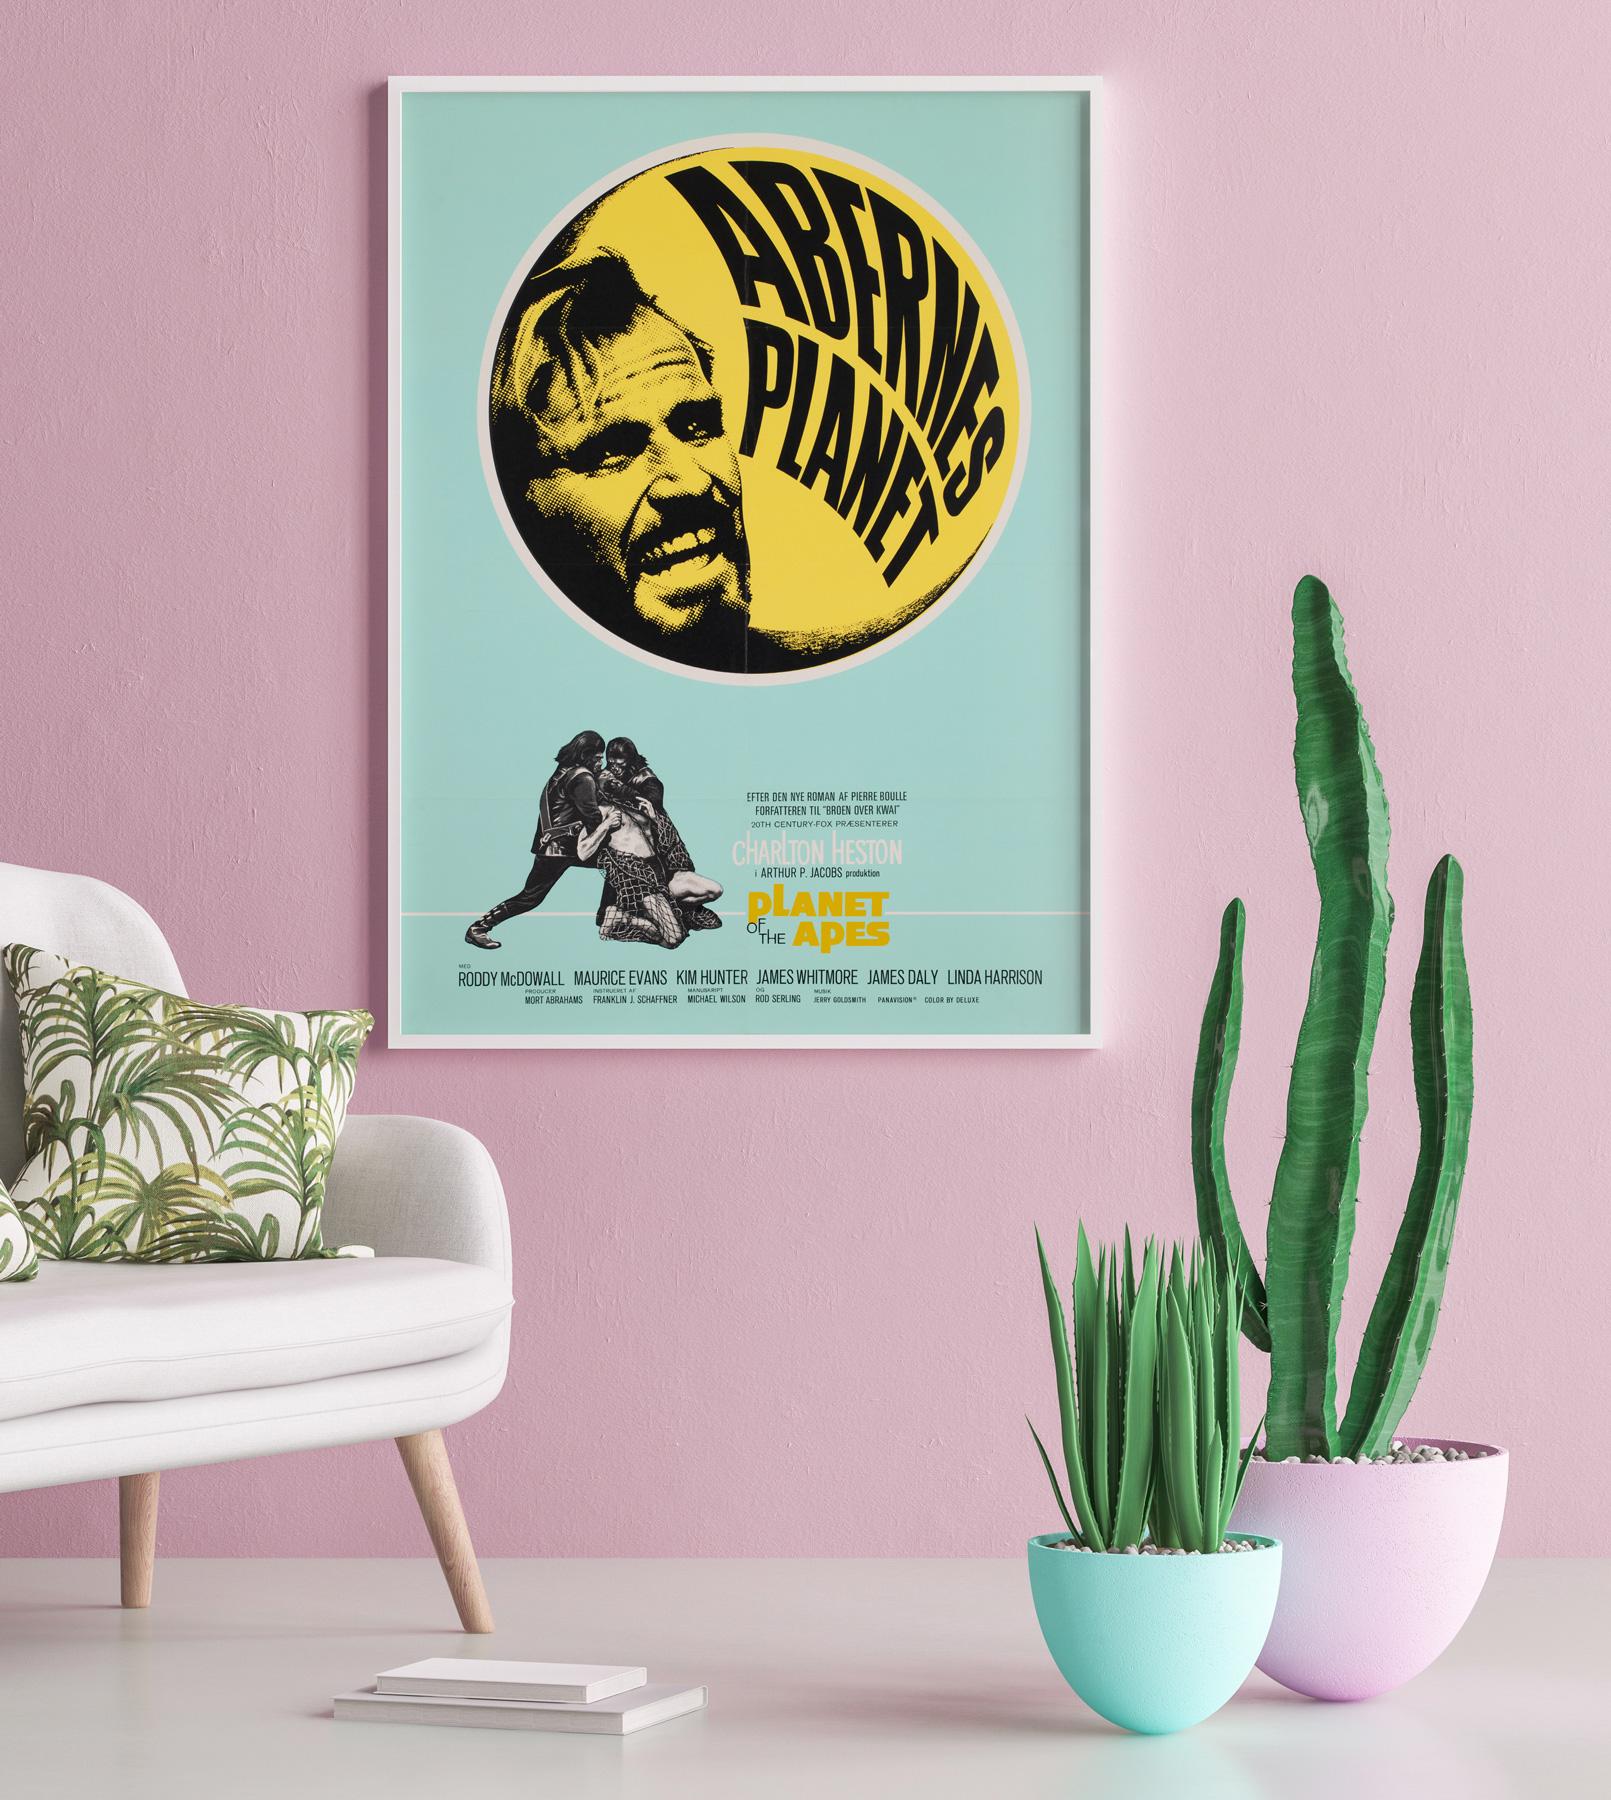 Striking design features on this original first-year-of-release Danish film poster for seminal sci-fi Plant of the Apes. Wonderful colours.

This original vintage movie poster is sized 24 1/2 x 33 1/2 inches. It will be sent rolled (unframed).

